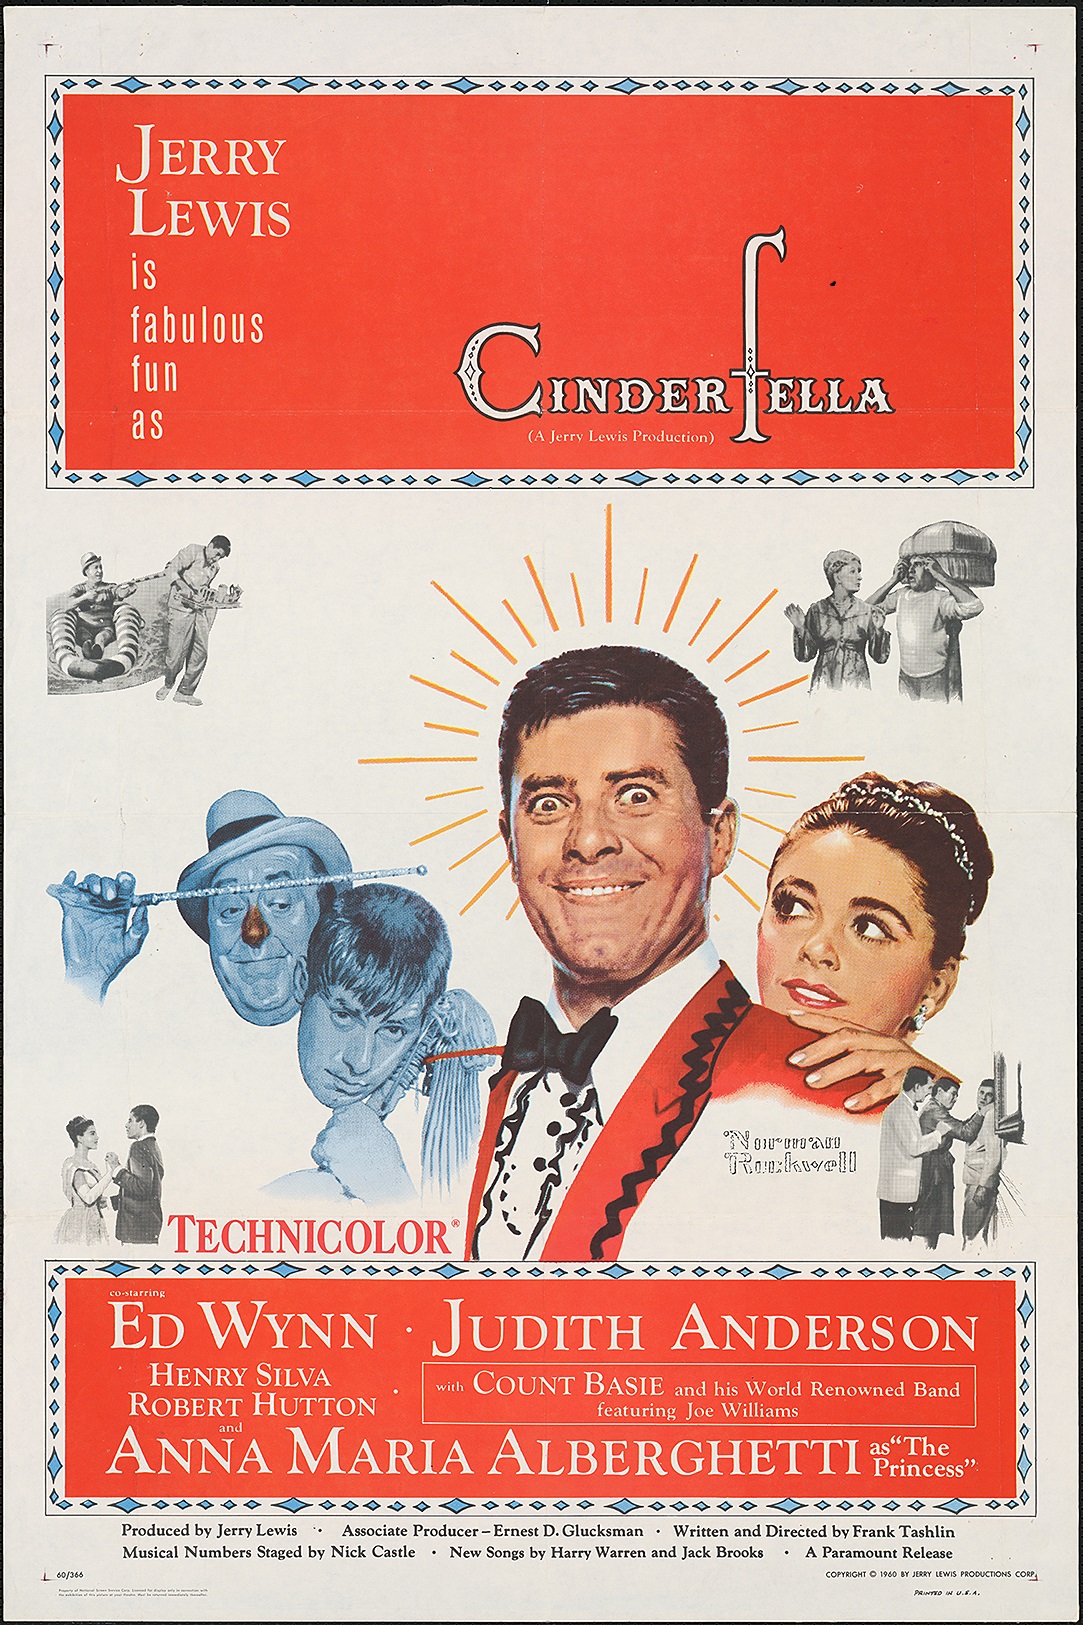 A movie poster that includes an image of a man on a white background